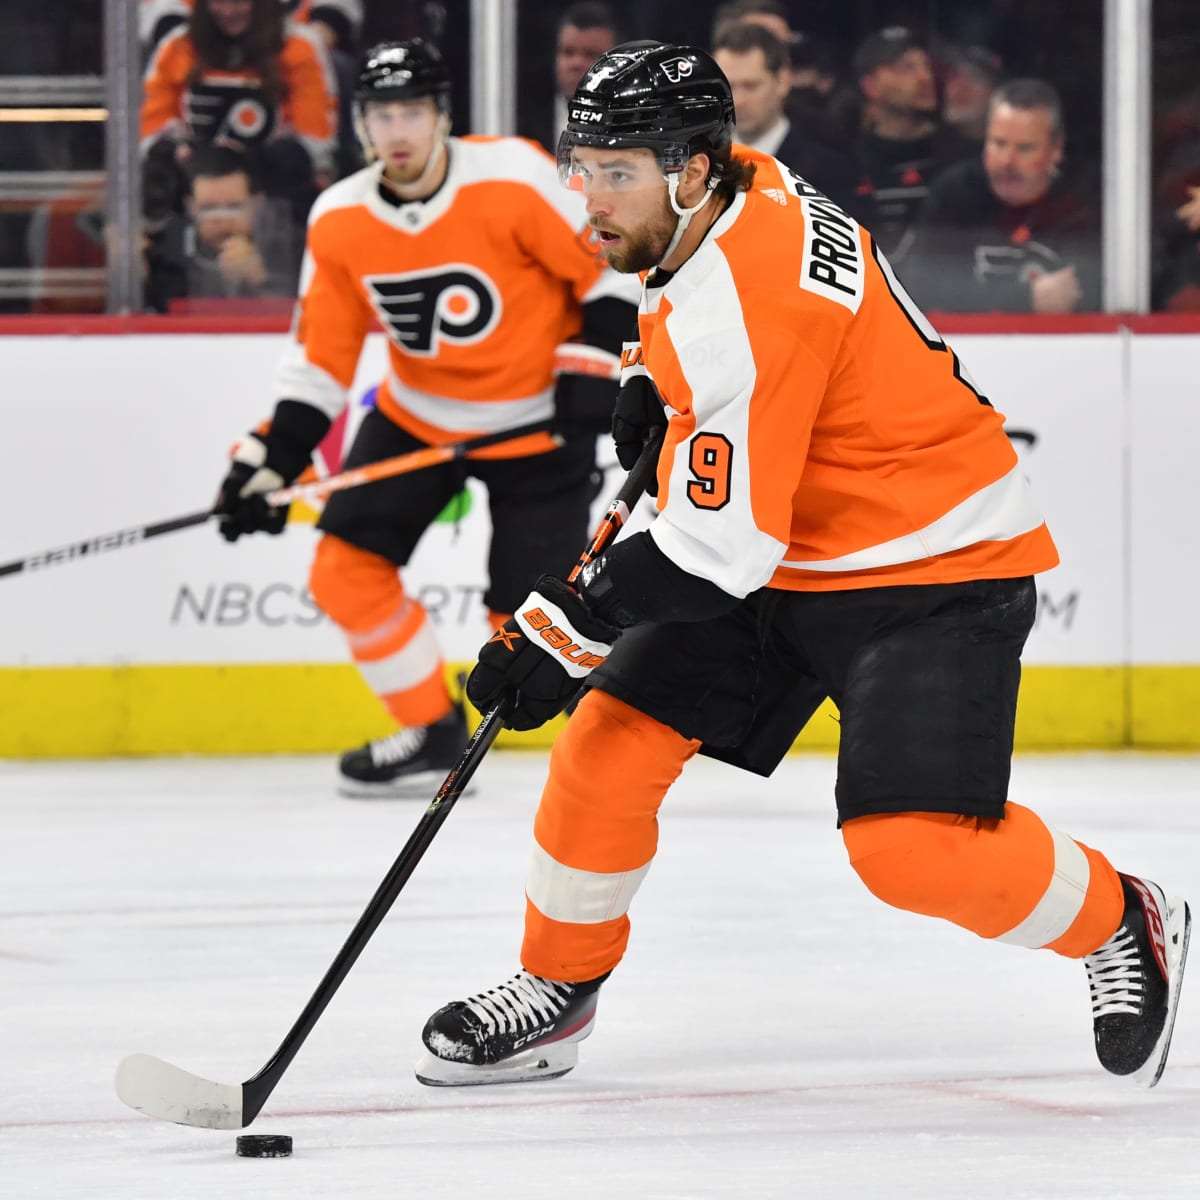 Flyers Ivan Provorov boycotted the team's pregame warmups Tuesday